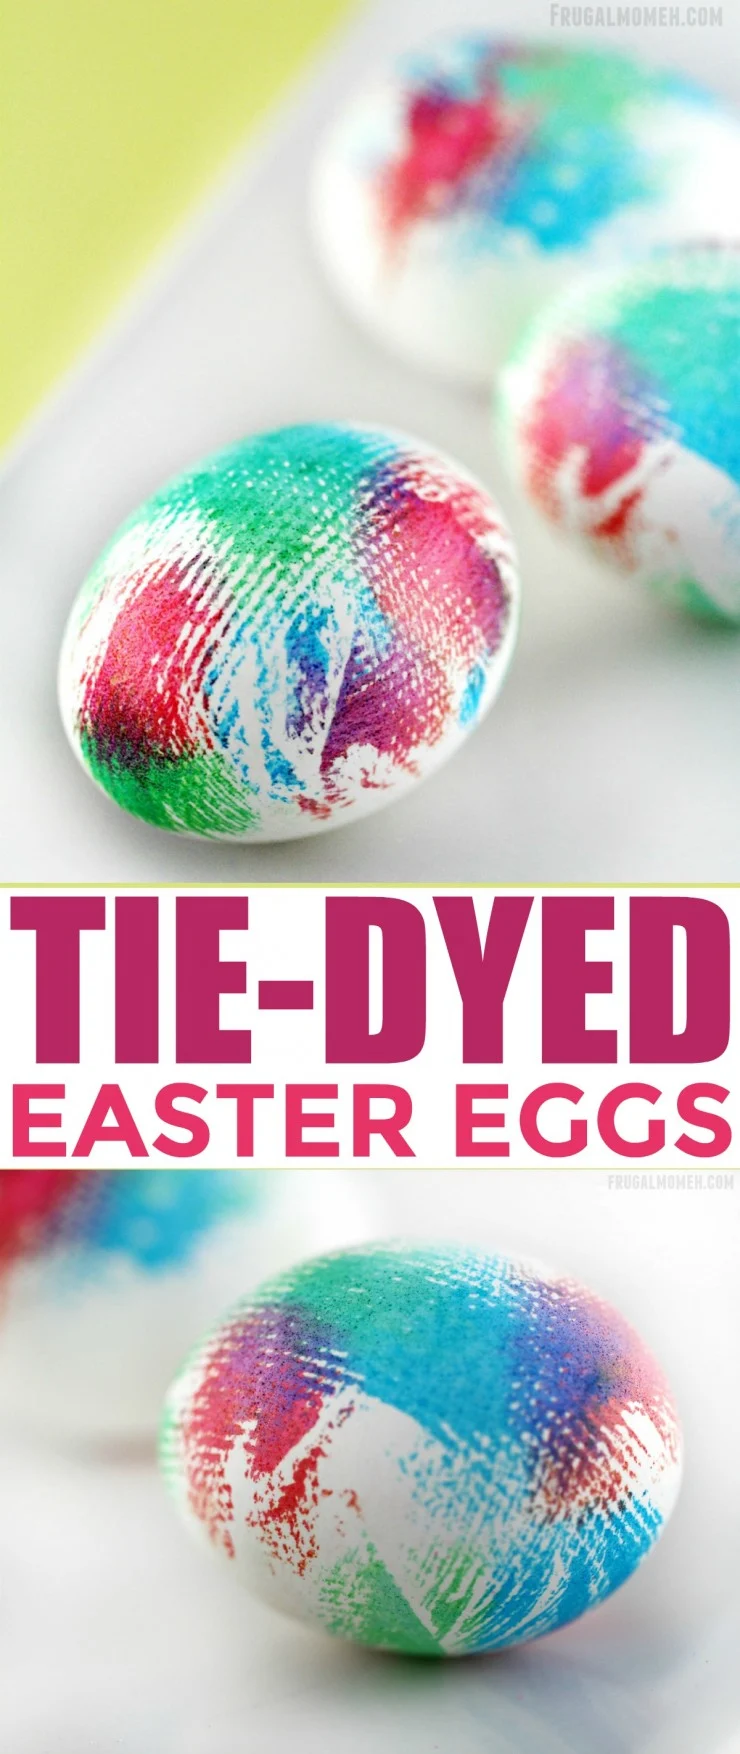 Tie-Dyed Easter Eggs are a a groovy way to decorate Easter Eggs for your Easter home decor!  The technique is surprisingly easy.